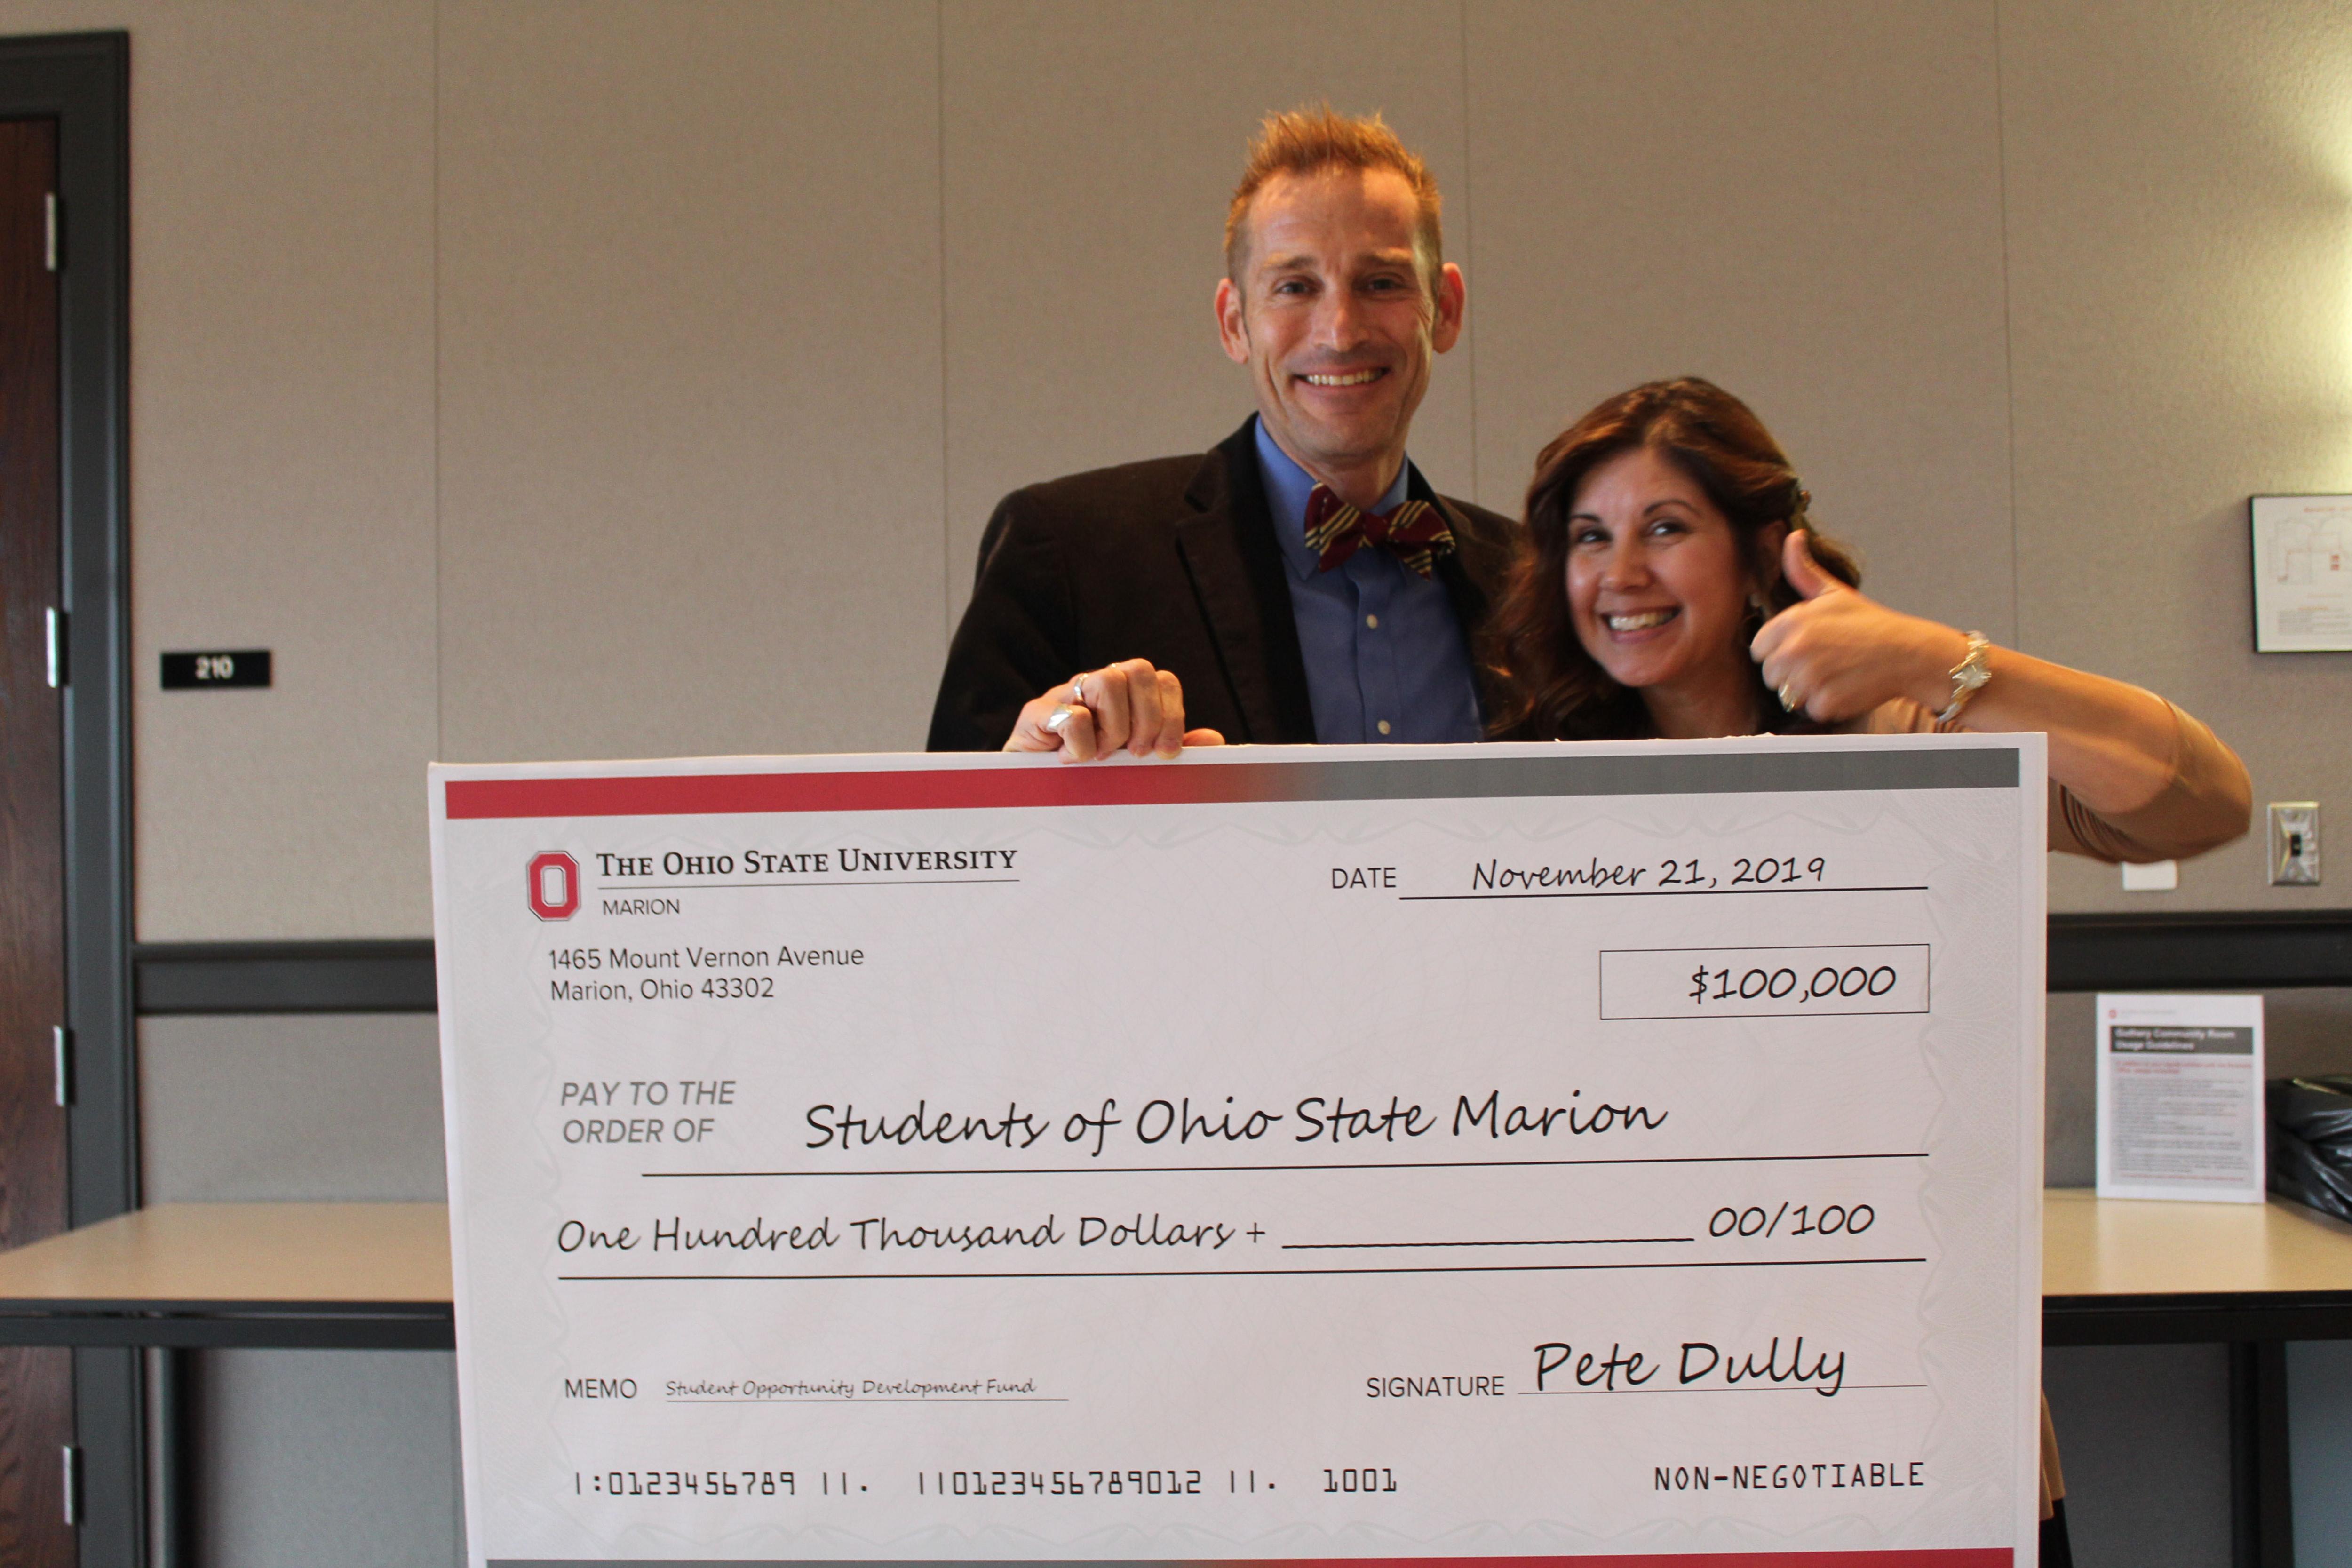 Pete Dully and Cathy Gerber with $100,000 check from Pete Dully to Students of Ohio State Marion